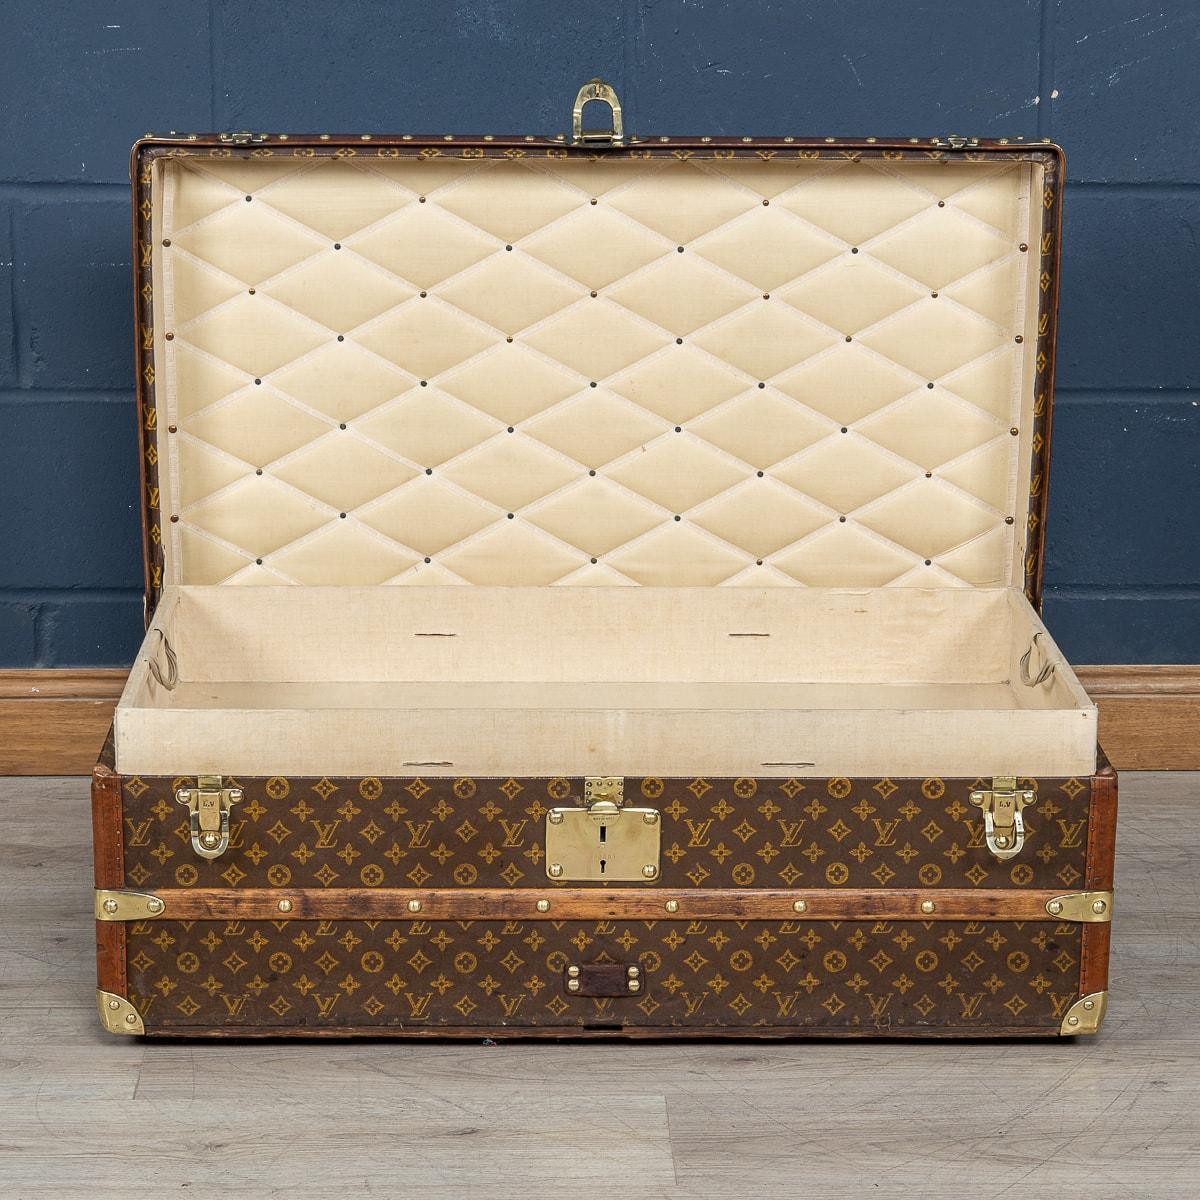 20th Century Louis Vuitton Cabin Trunk In Monogram Canvas, France c.1930 For Sale 1